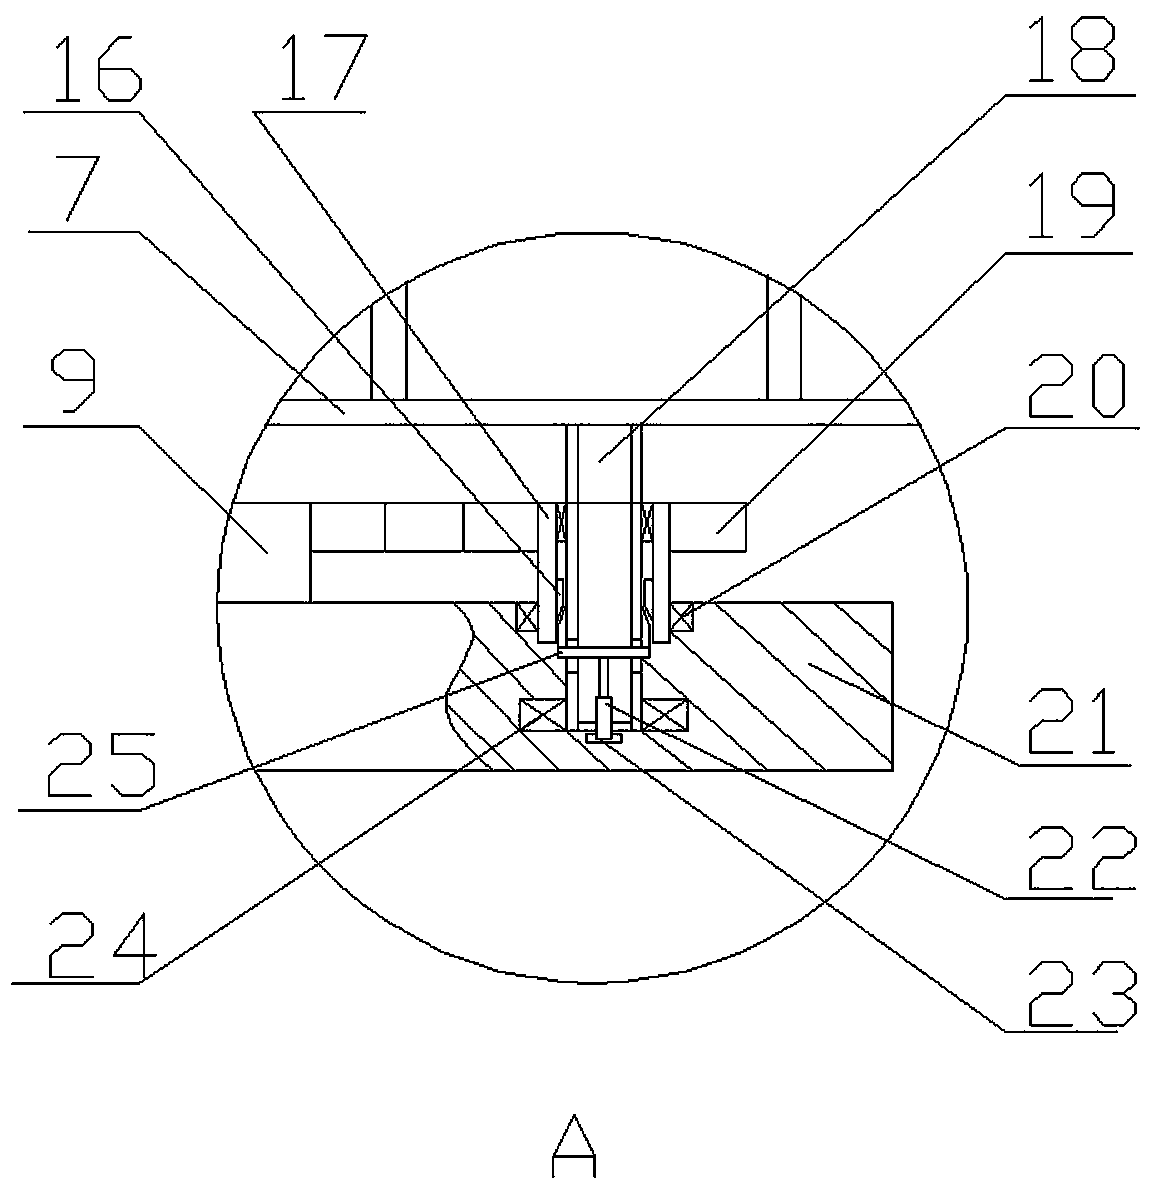 A waste cable material separation and recovery device